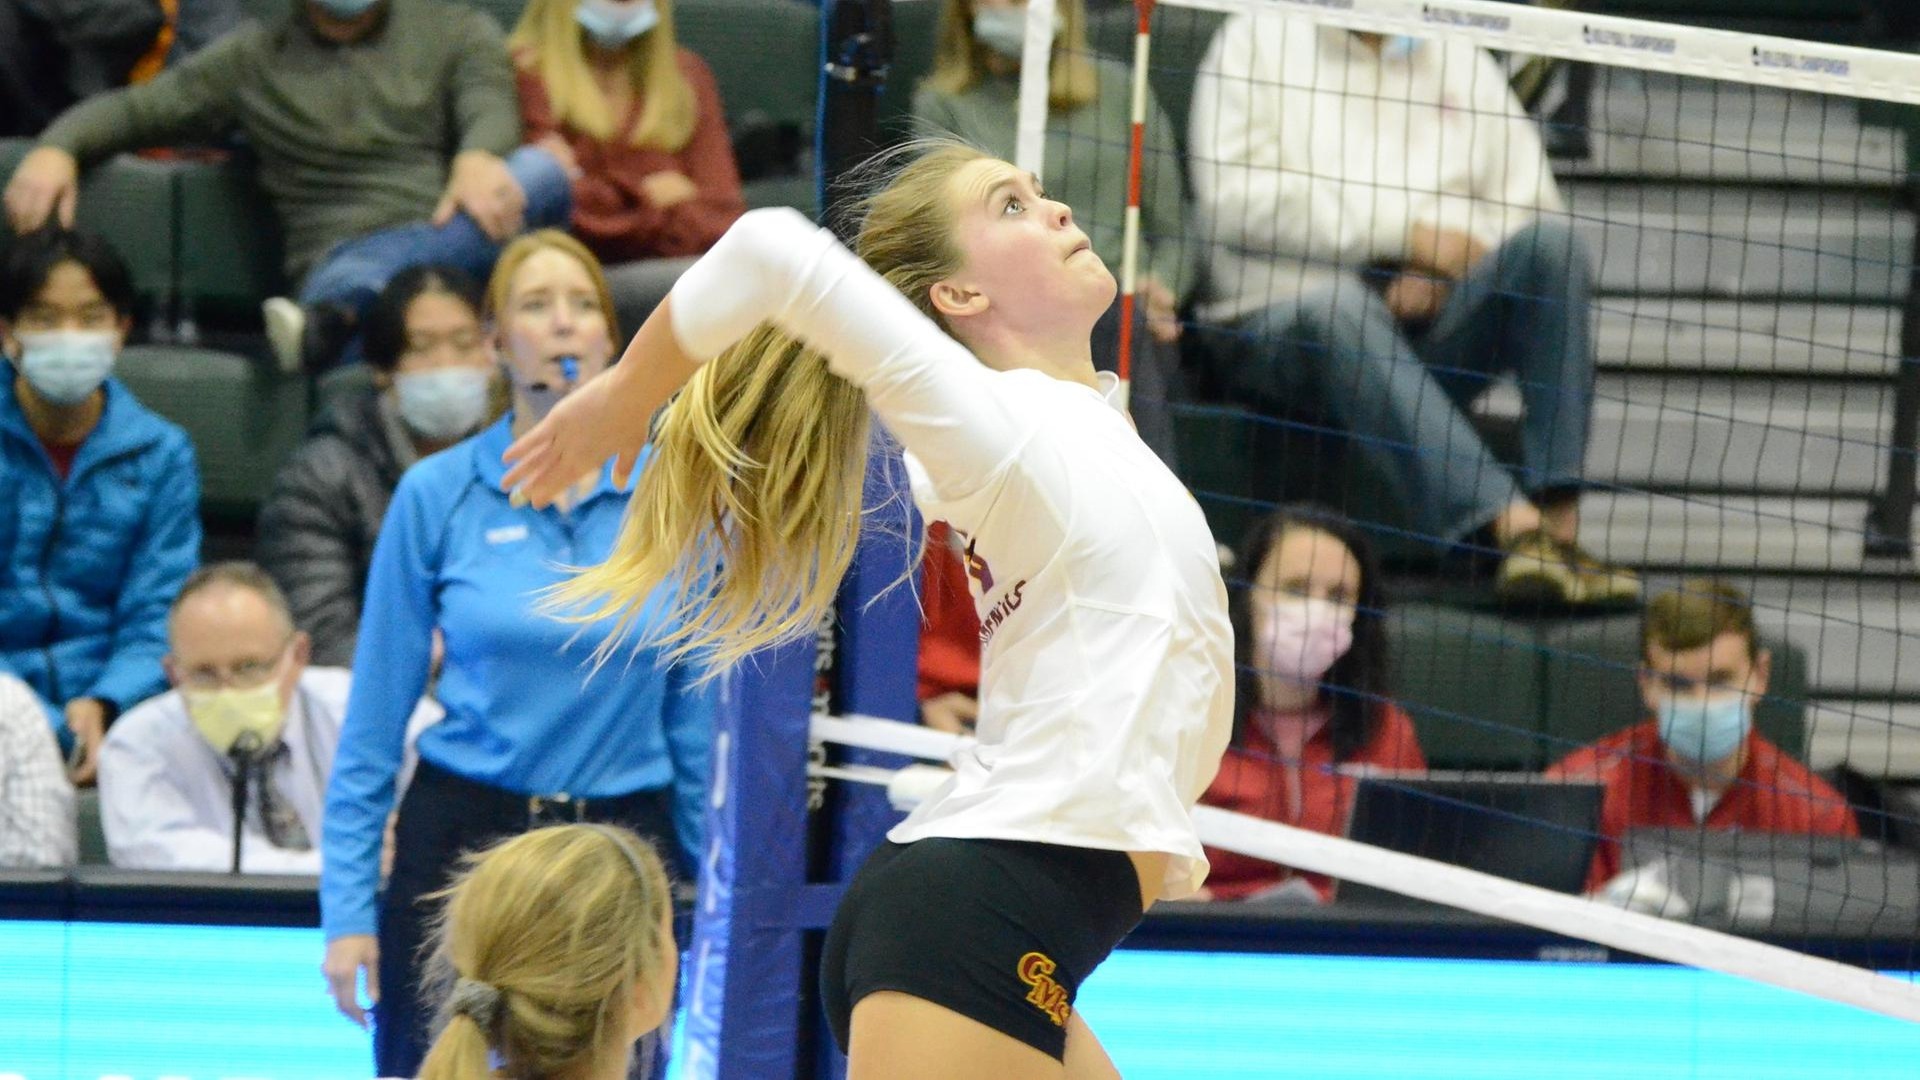 Kelsey Polhemus had 7 kills in 9 attempts for CMS (photo by Ricky Bassman)